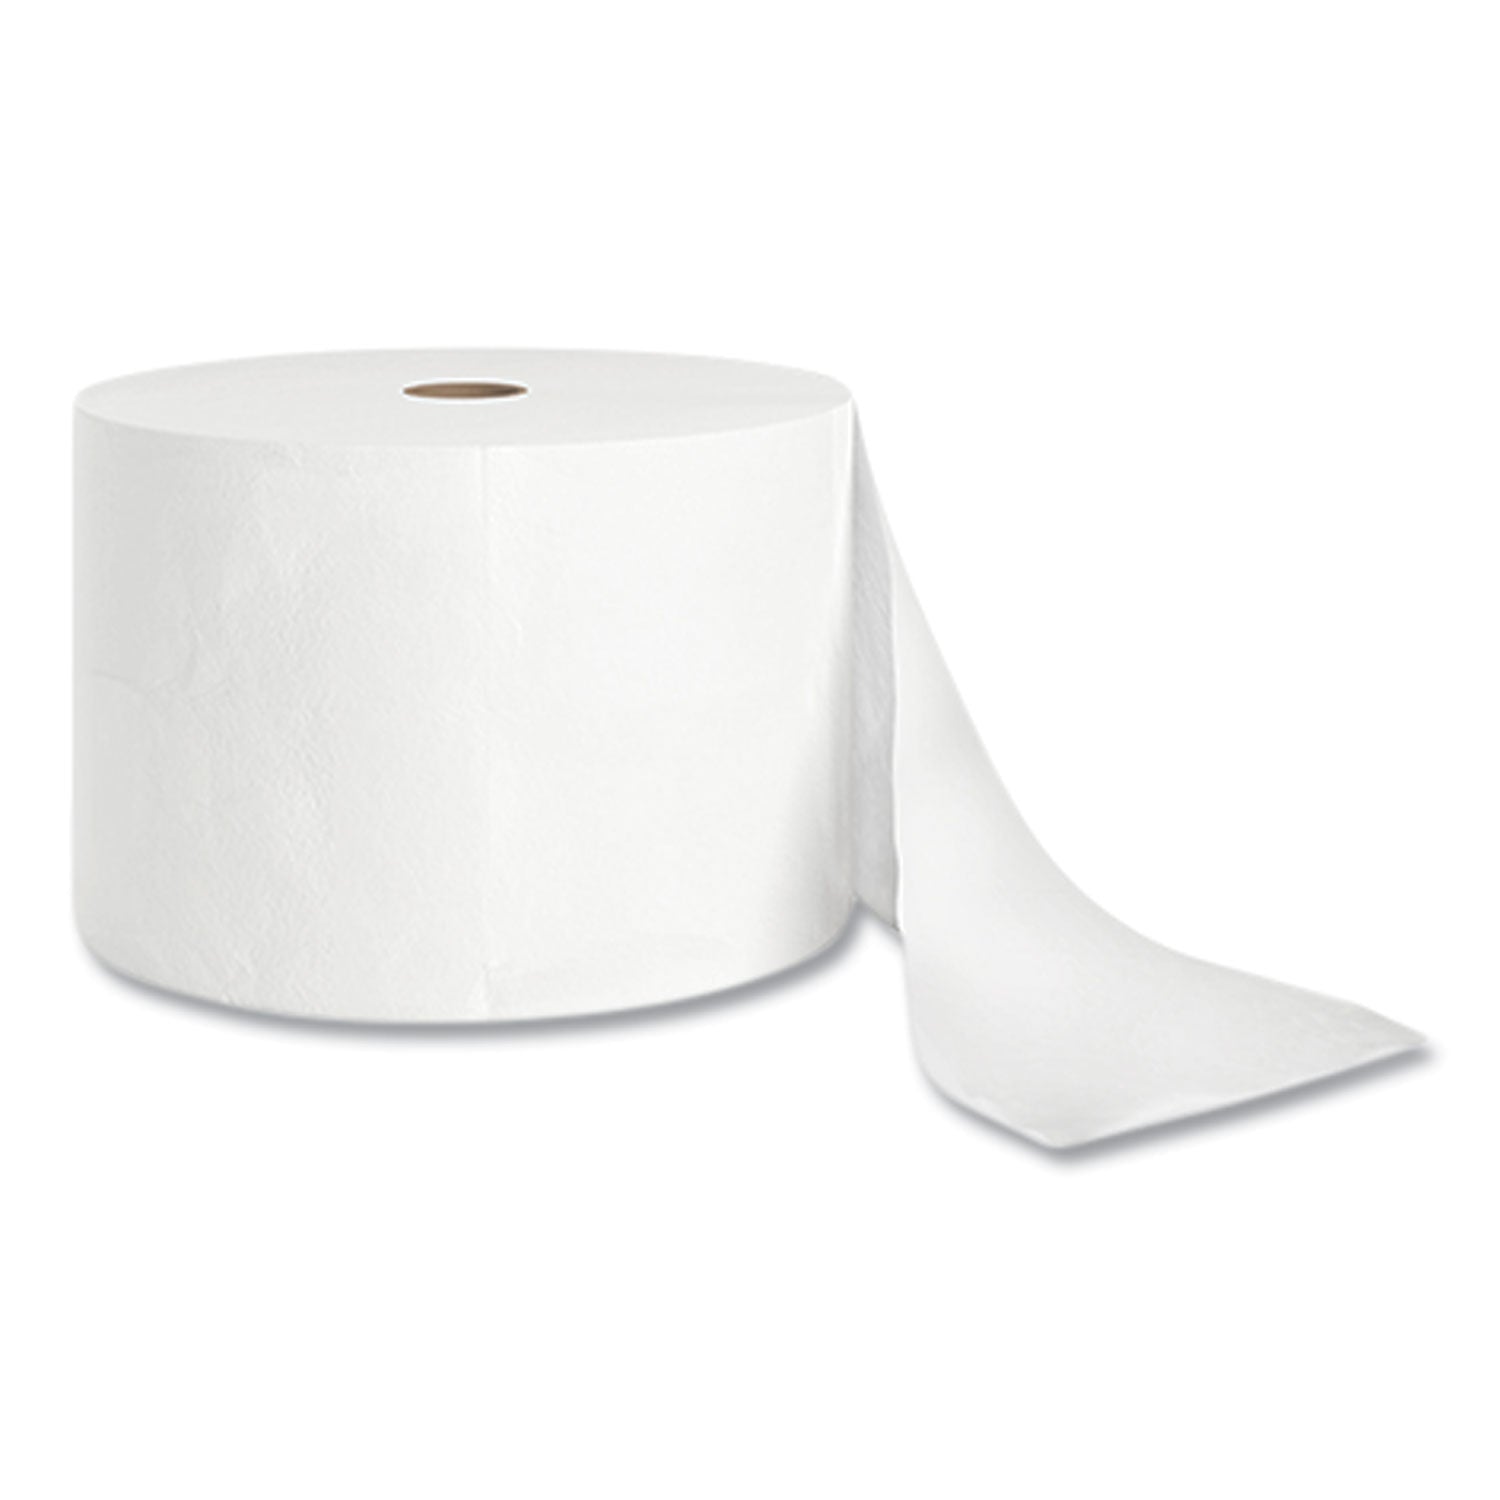 j-series-2-ply-small-core-bath-tissue-septic-safe-white-1500-sheets-roll-18-rolls-carton_cwz24405975 - 1